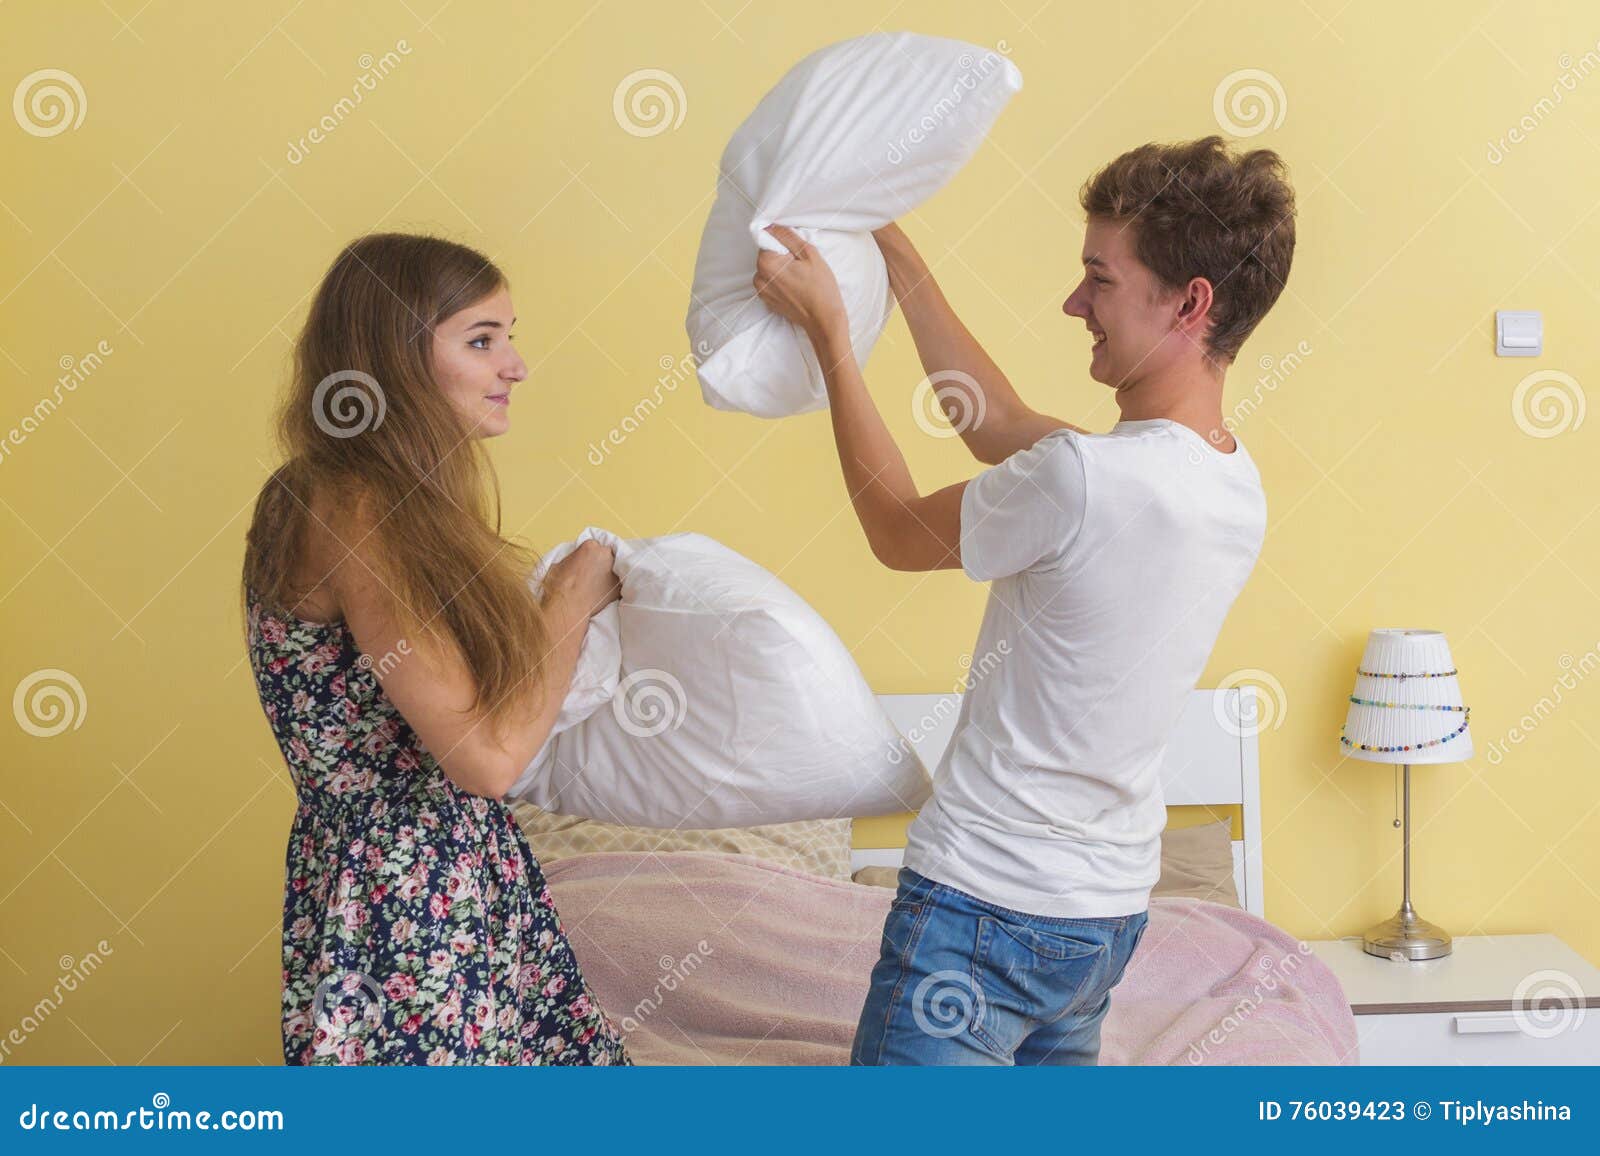 Young Couple Teens Pillow Fight Stock Image Image Of Human